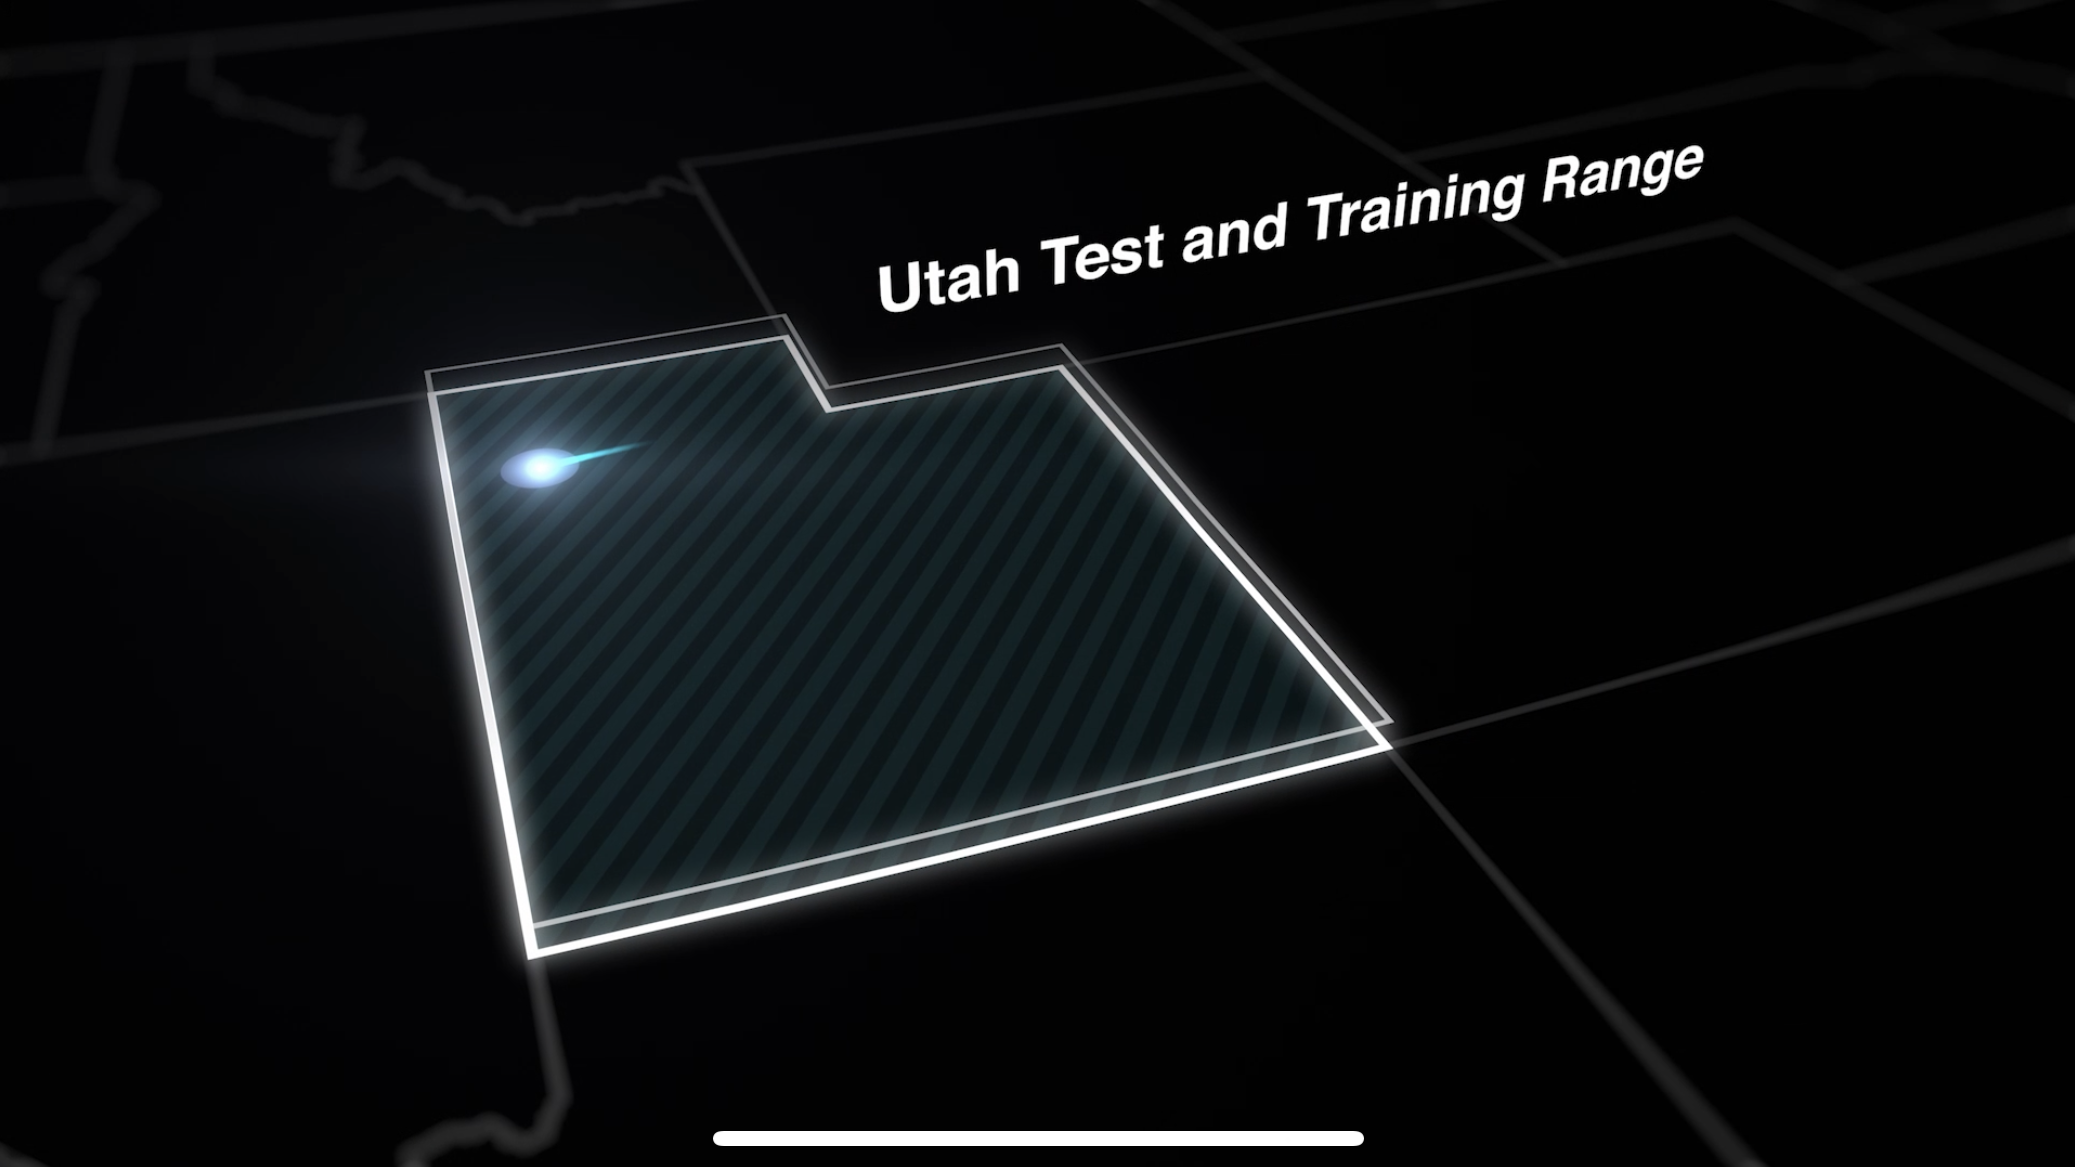 a map of utah, and a dot indicating the location of the DoD utah test and training range.